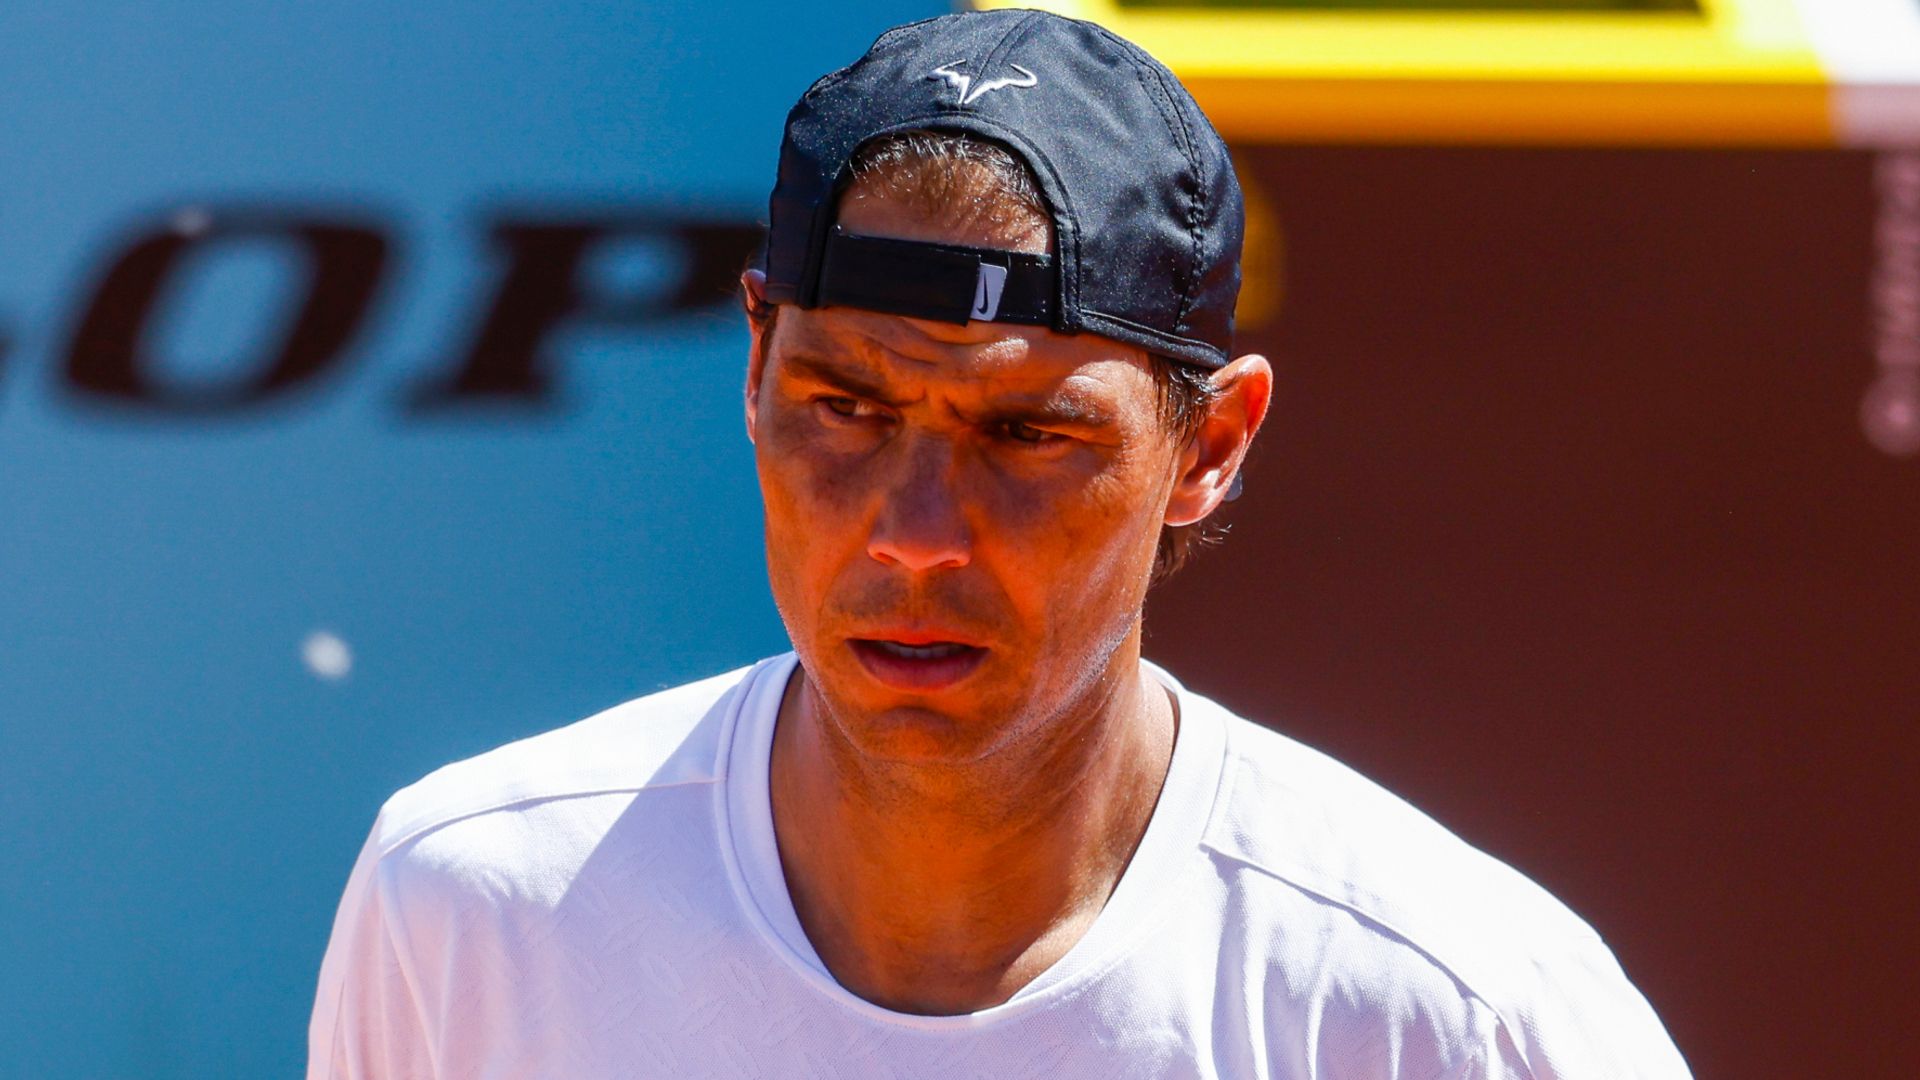 Nadal uncertain over French Open: 'I wouldn't play today'